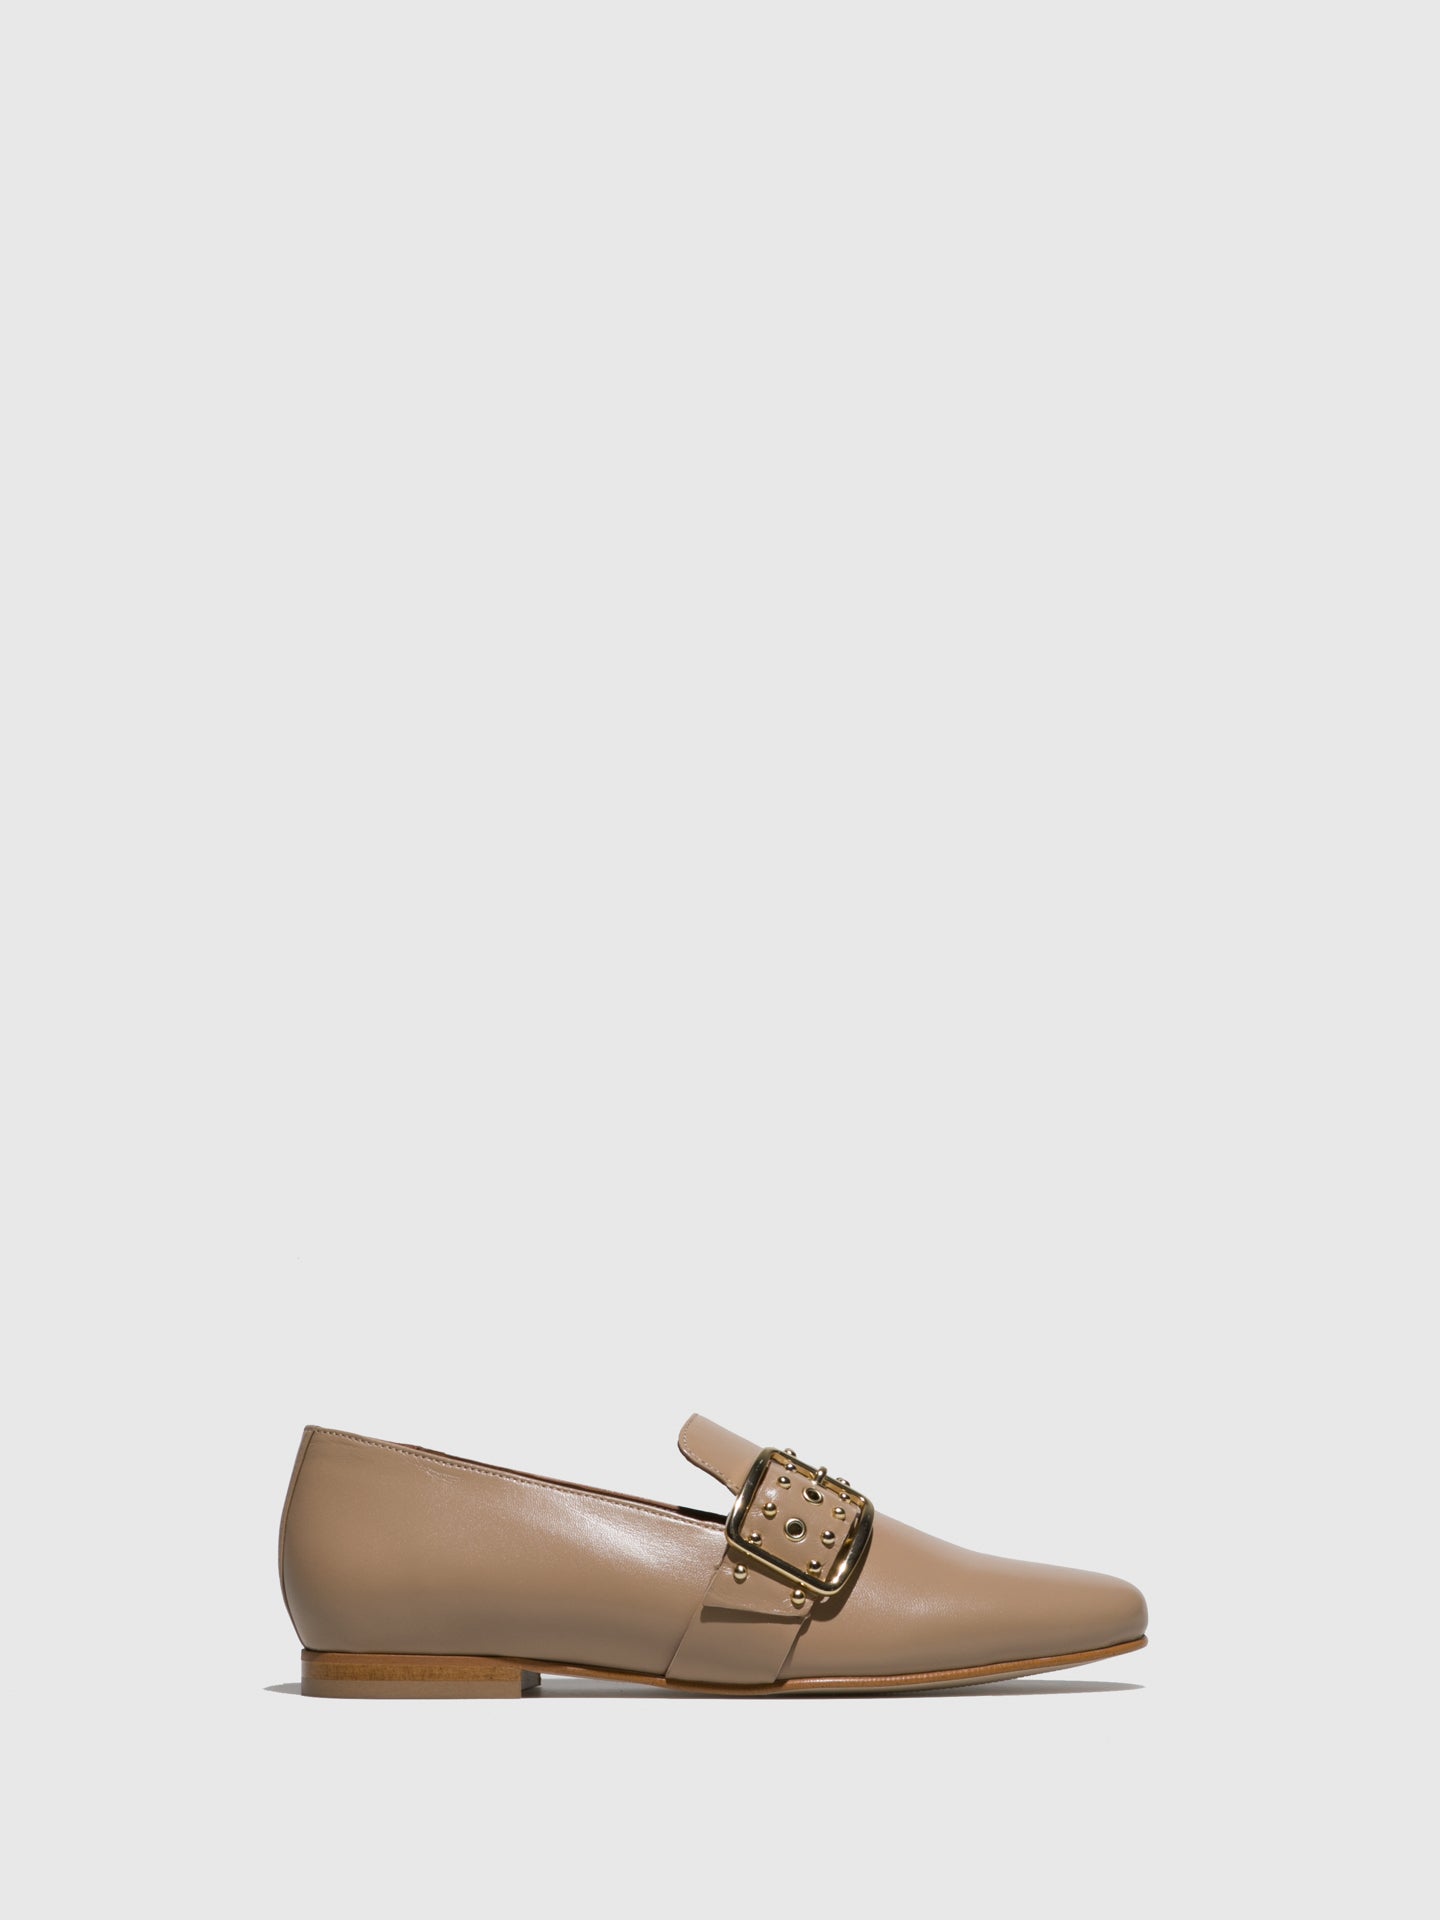 JJ Heitor Beige Leather Loafers Shoes